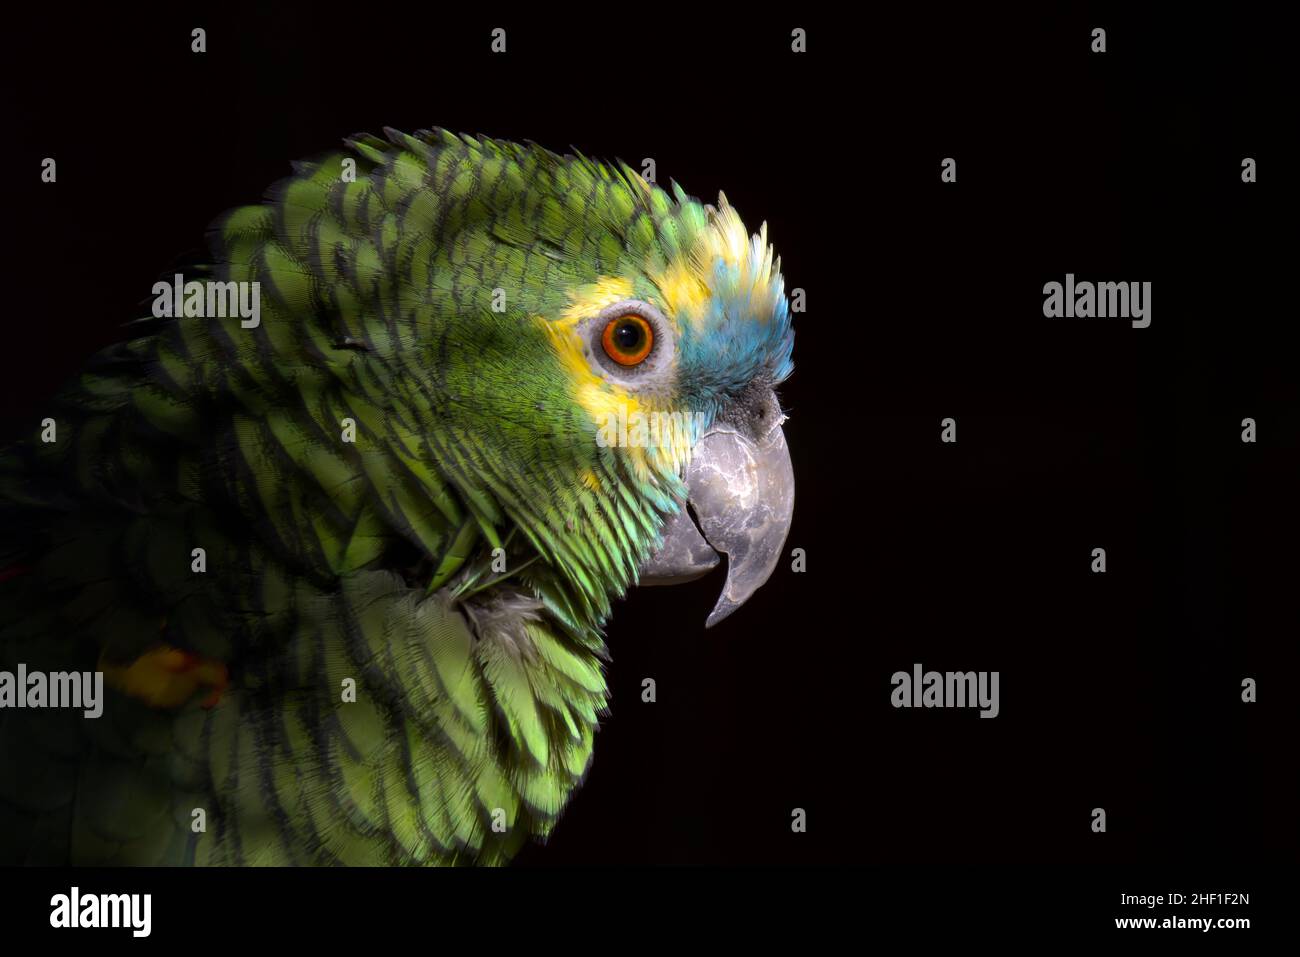 Blue-fronted Parrot in an enclosure in Germany Stock Photo